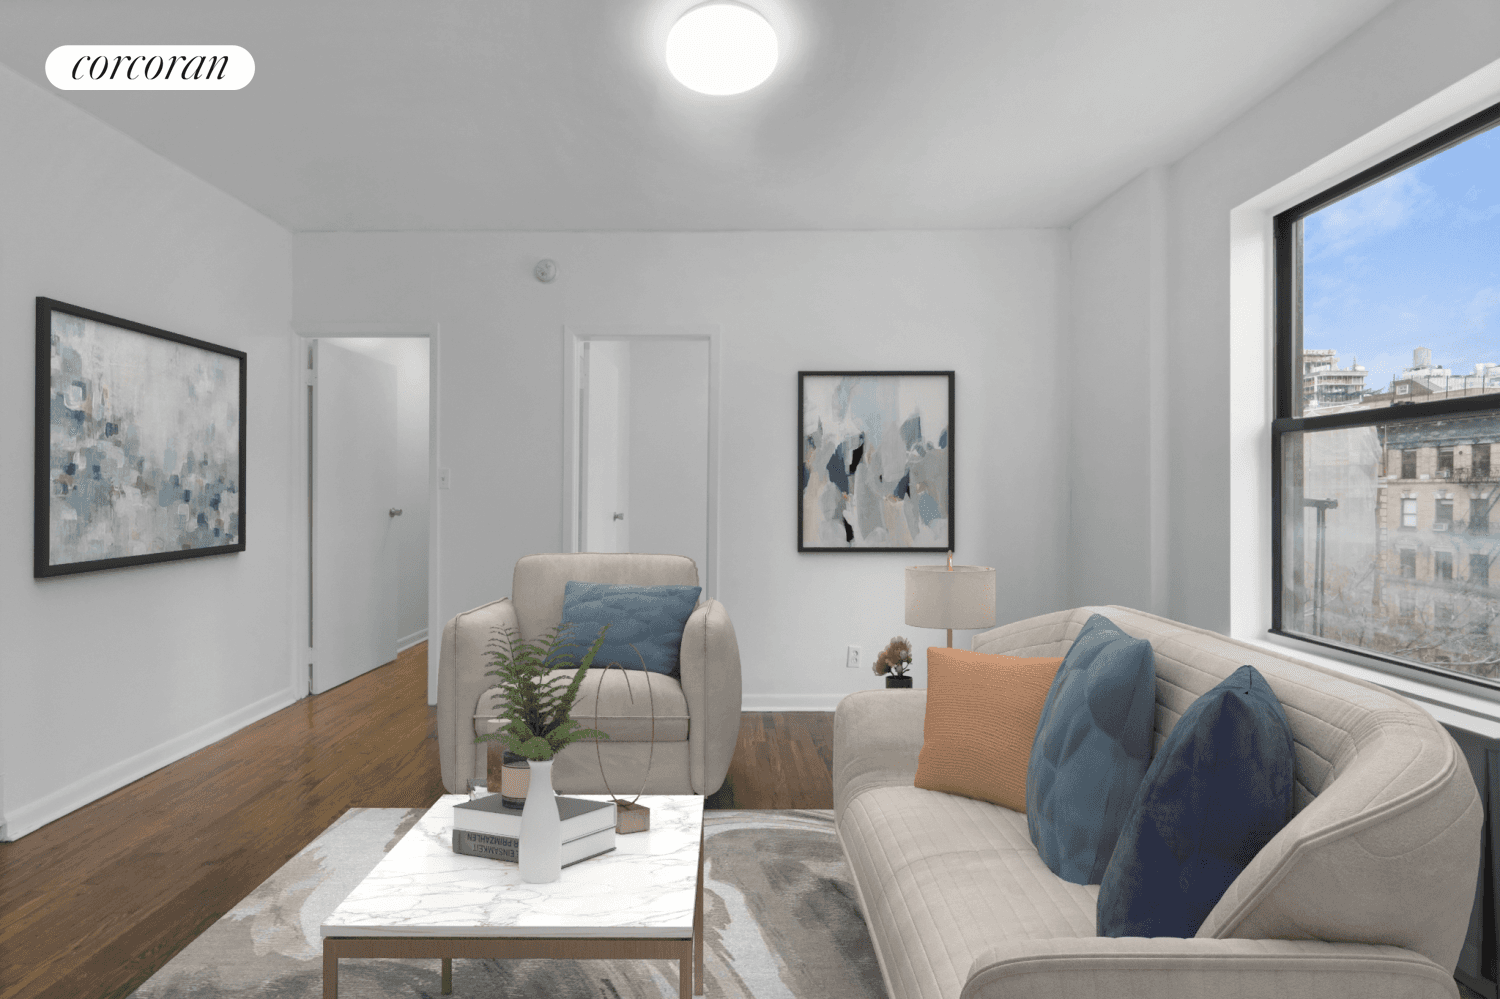 Renovated 2 Bedroom in Prime LES location Apartment Features Brand new gut renovated open kitchen featuring dishwasher and beautiful backsplash Gut renovated bathroom Updated polished hardwood flooring Queen bedrooms w ...